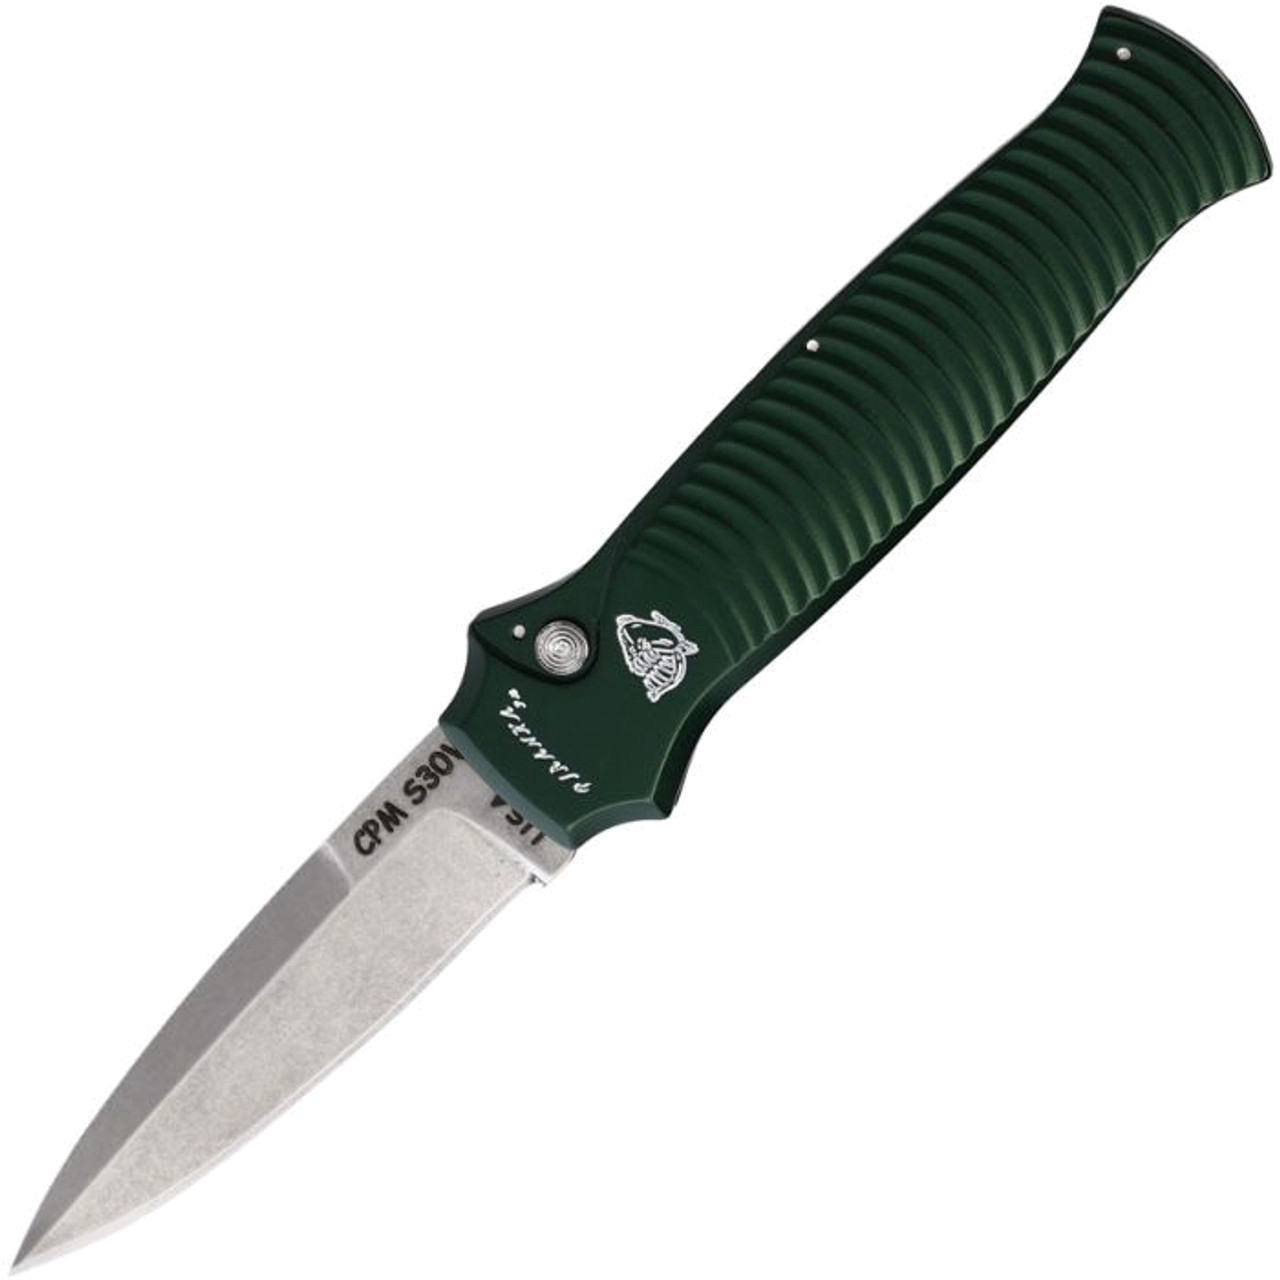 product image for Piranha Bodyguard Green Aluminum CPM-S30V Automatic Knife